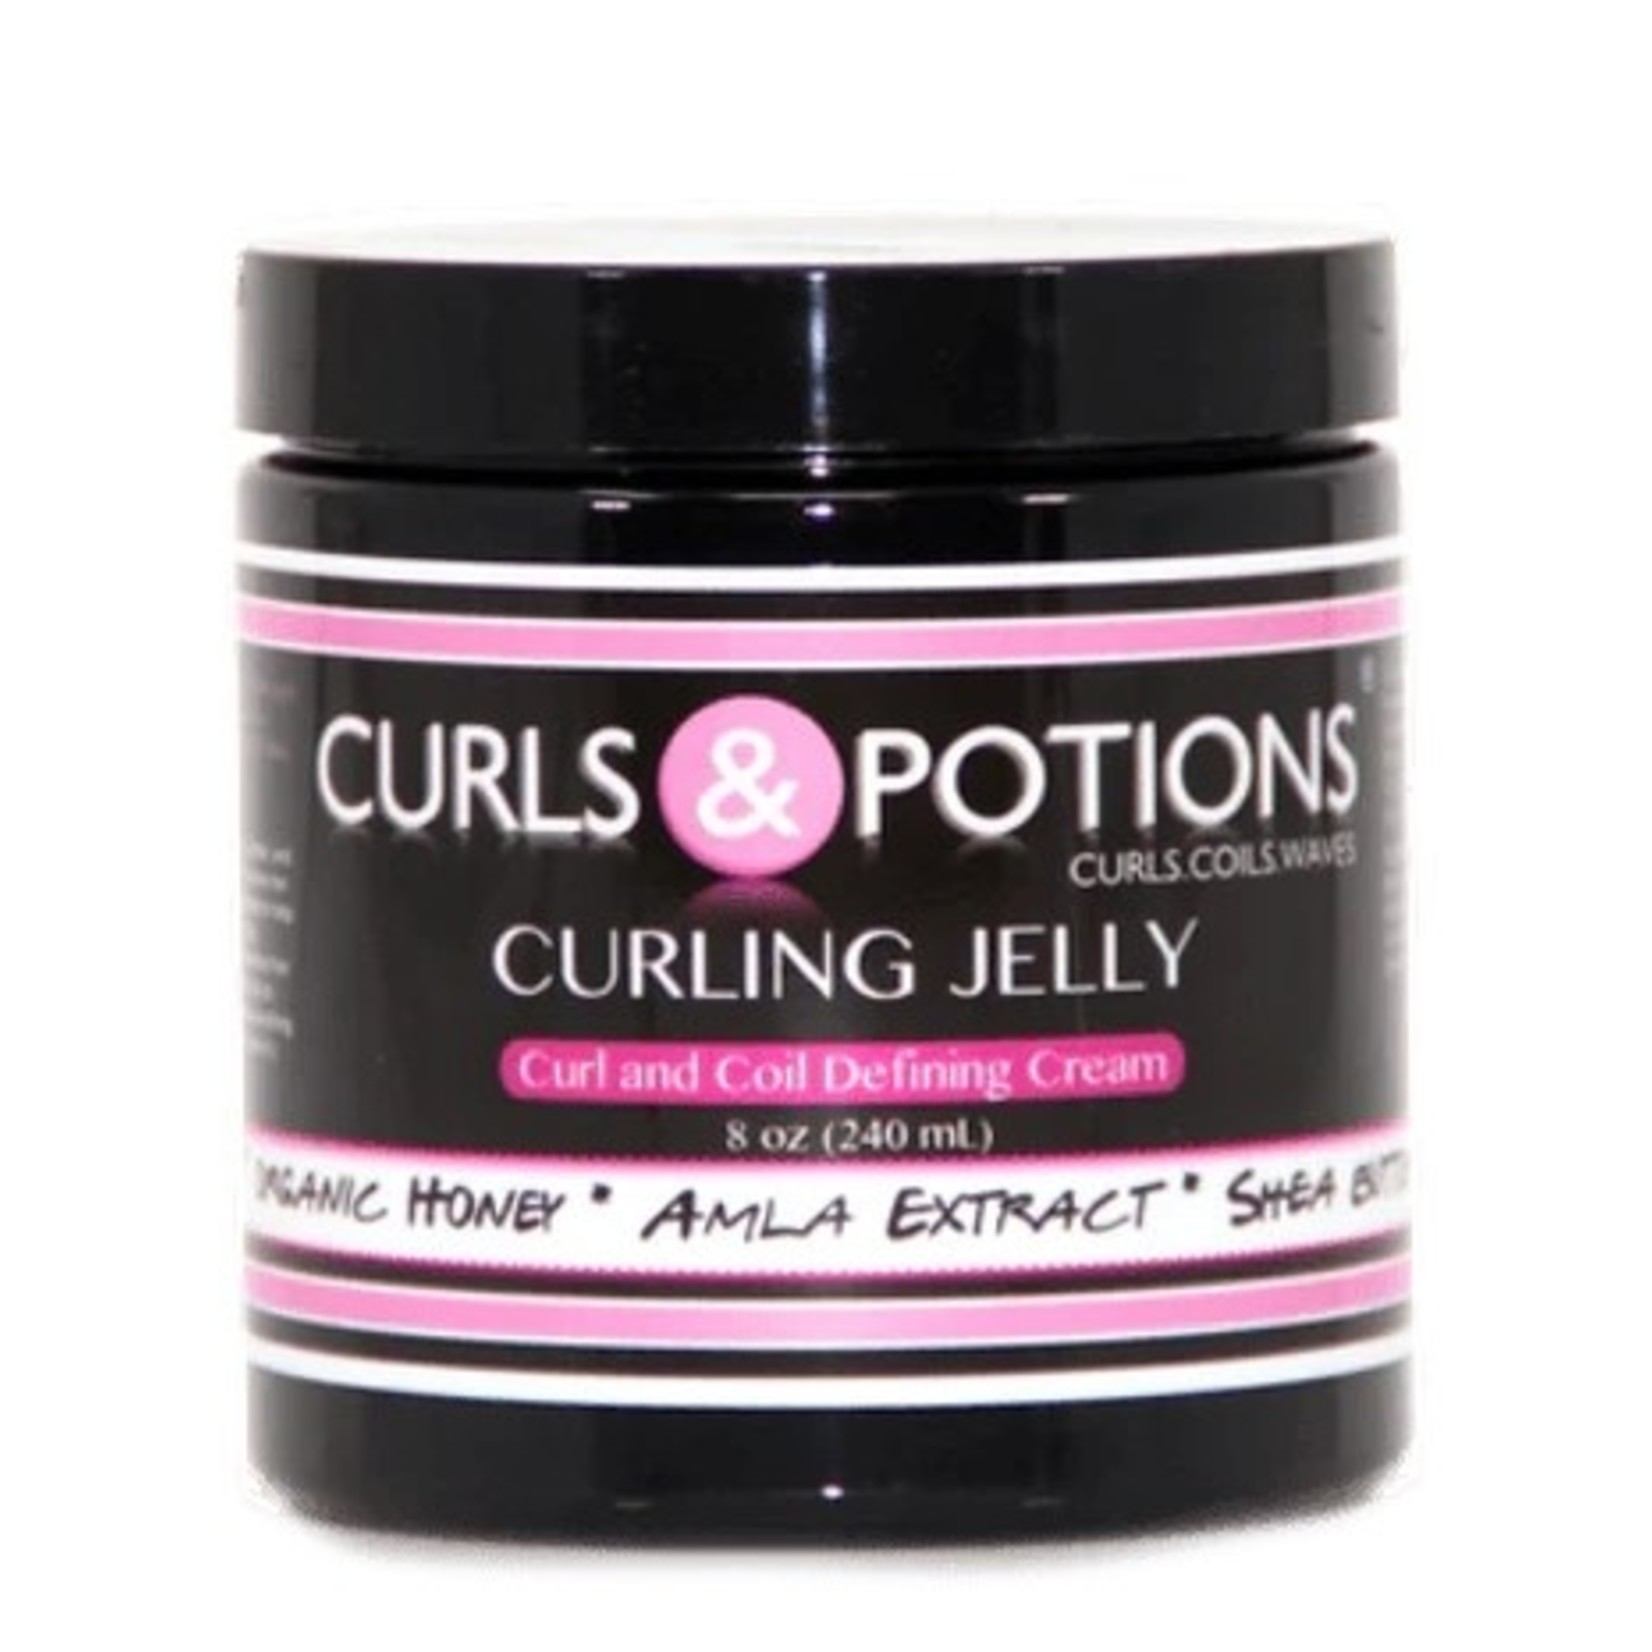 Curls & Potions Curls & Potions Curling Jelly